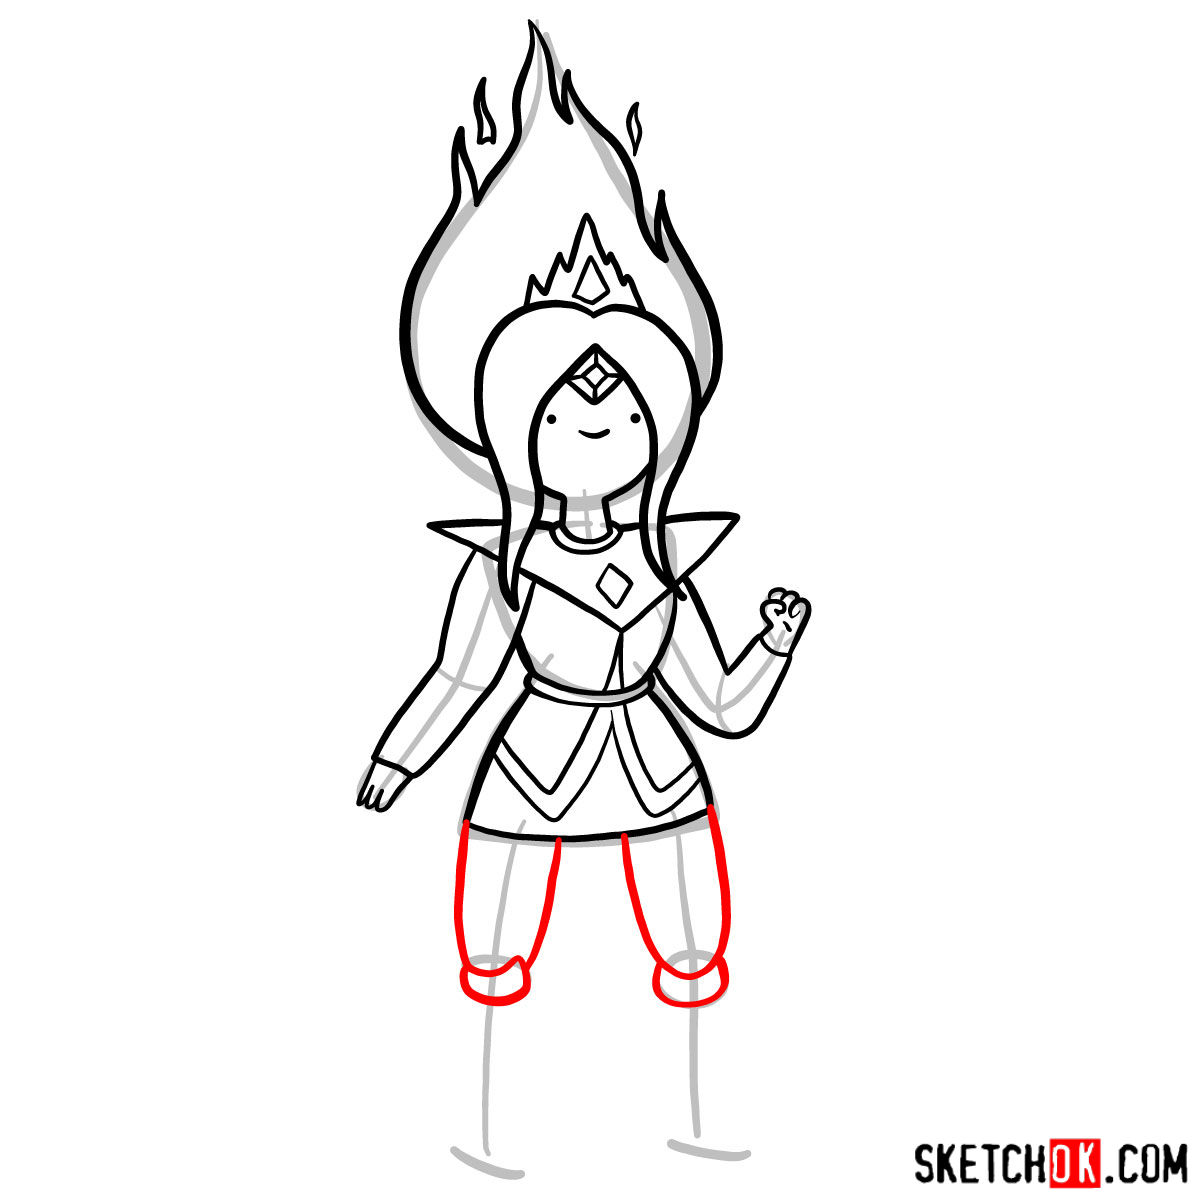 How to draw Flame Princess from Adventure Time - step 09